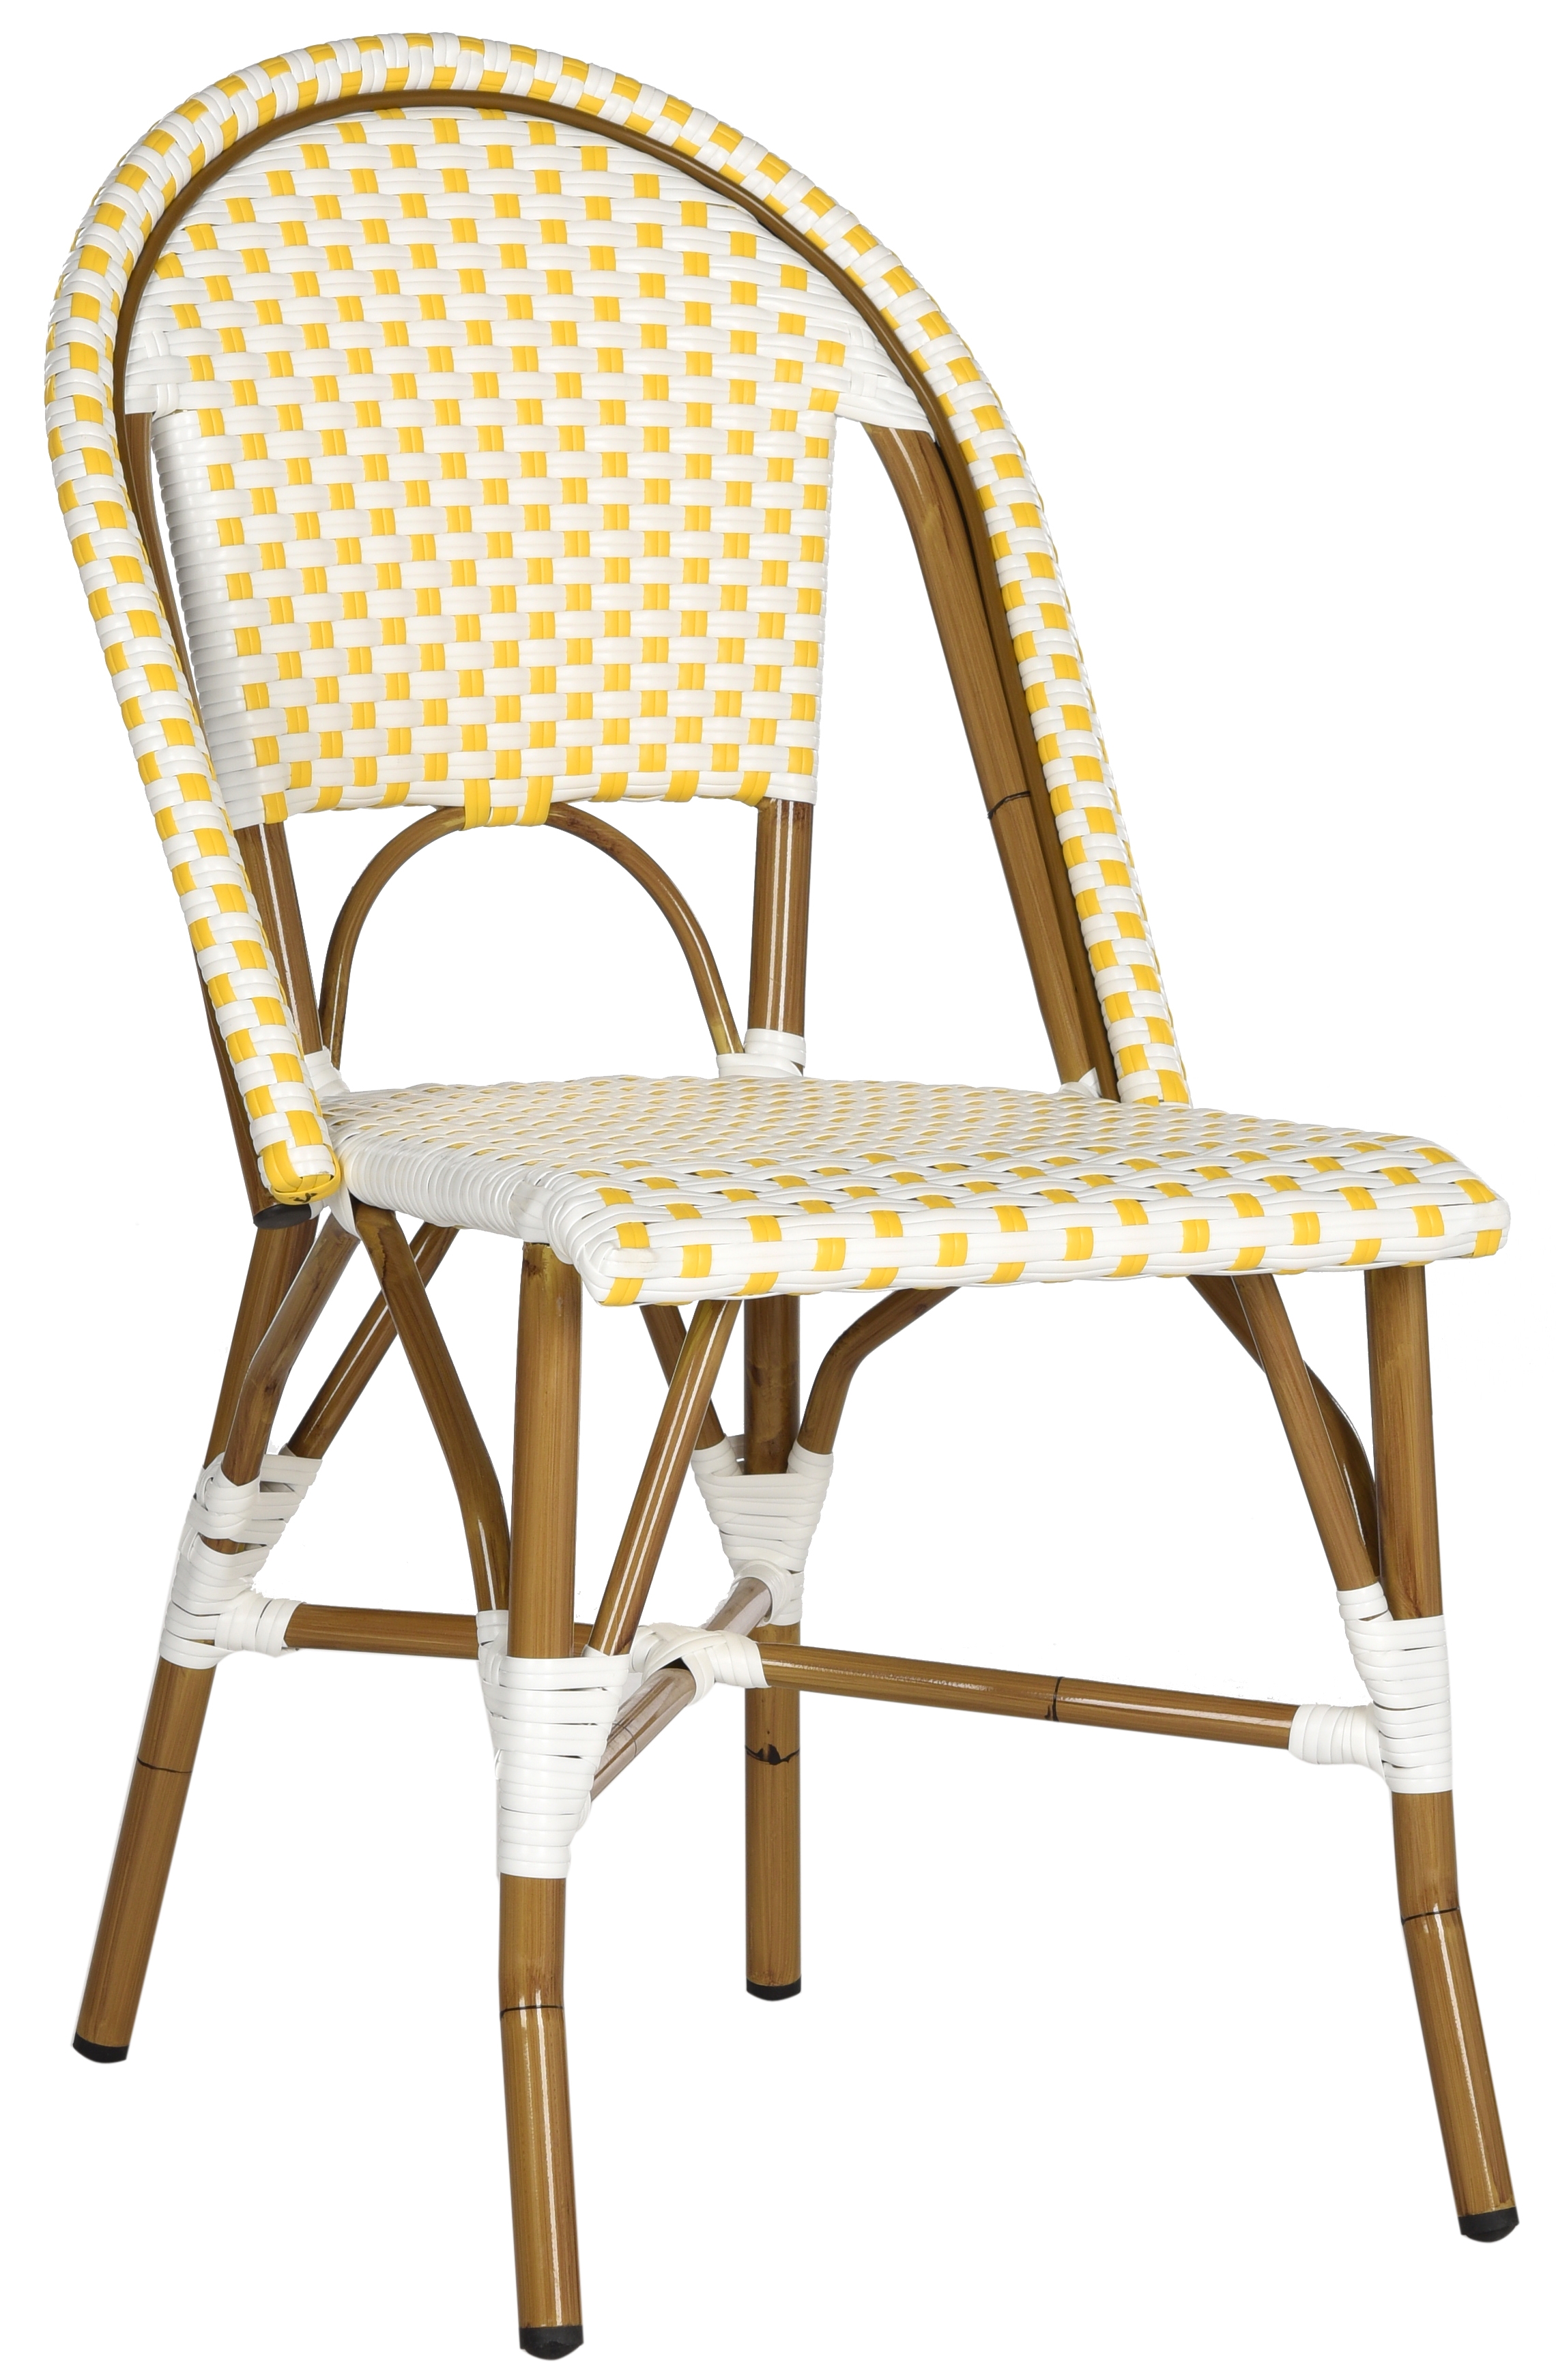 Salcha Indoor-Outdoor French Bistro Stacking Side Chair - Yellow/White/Light Brown - Arlo Home - Image 2